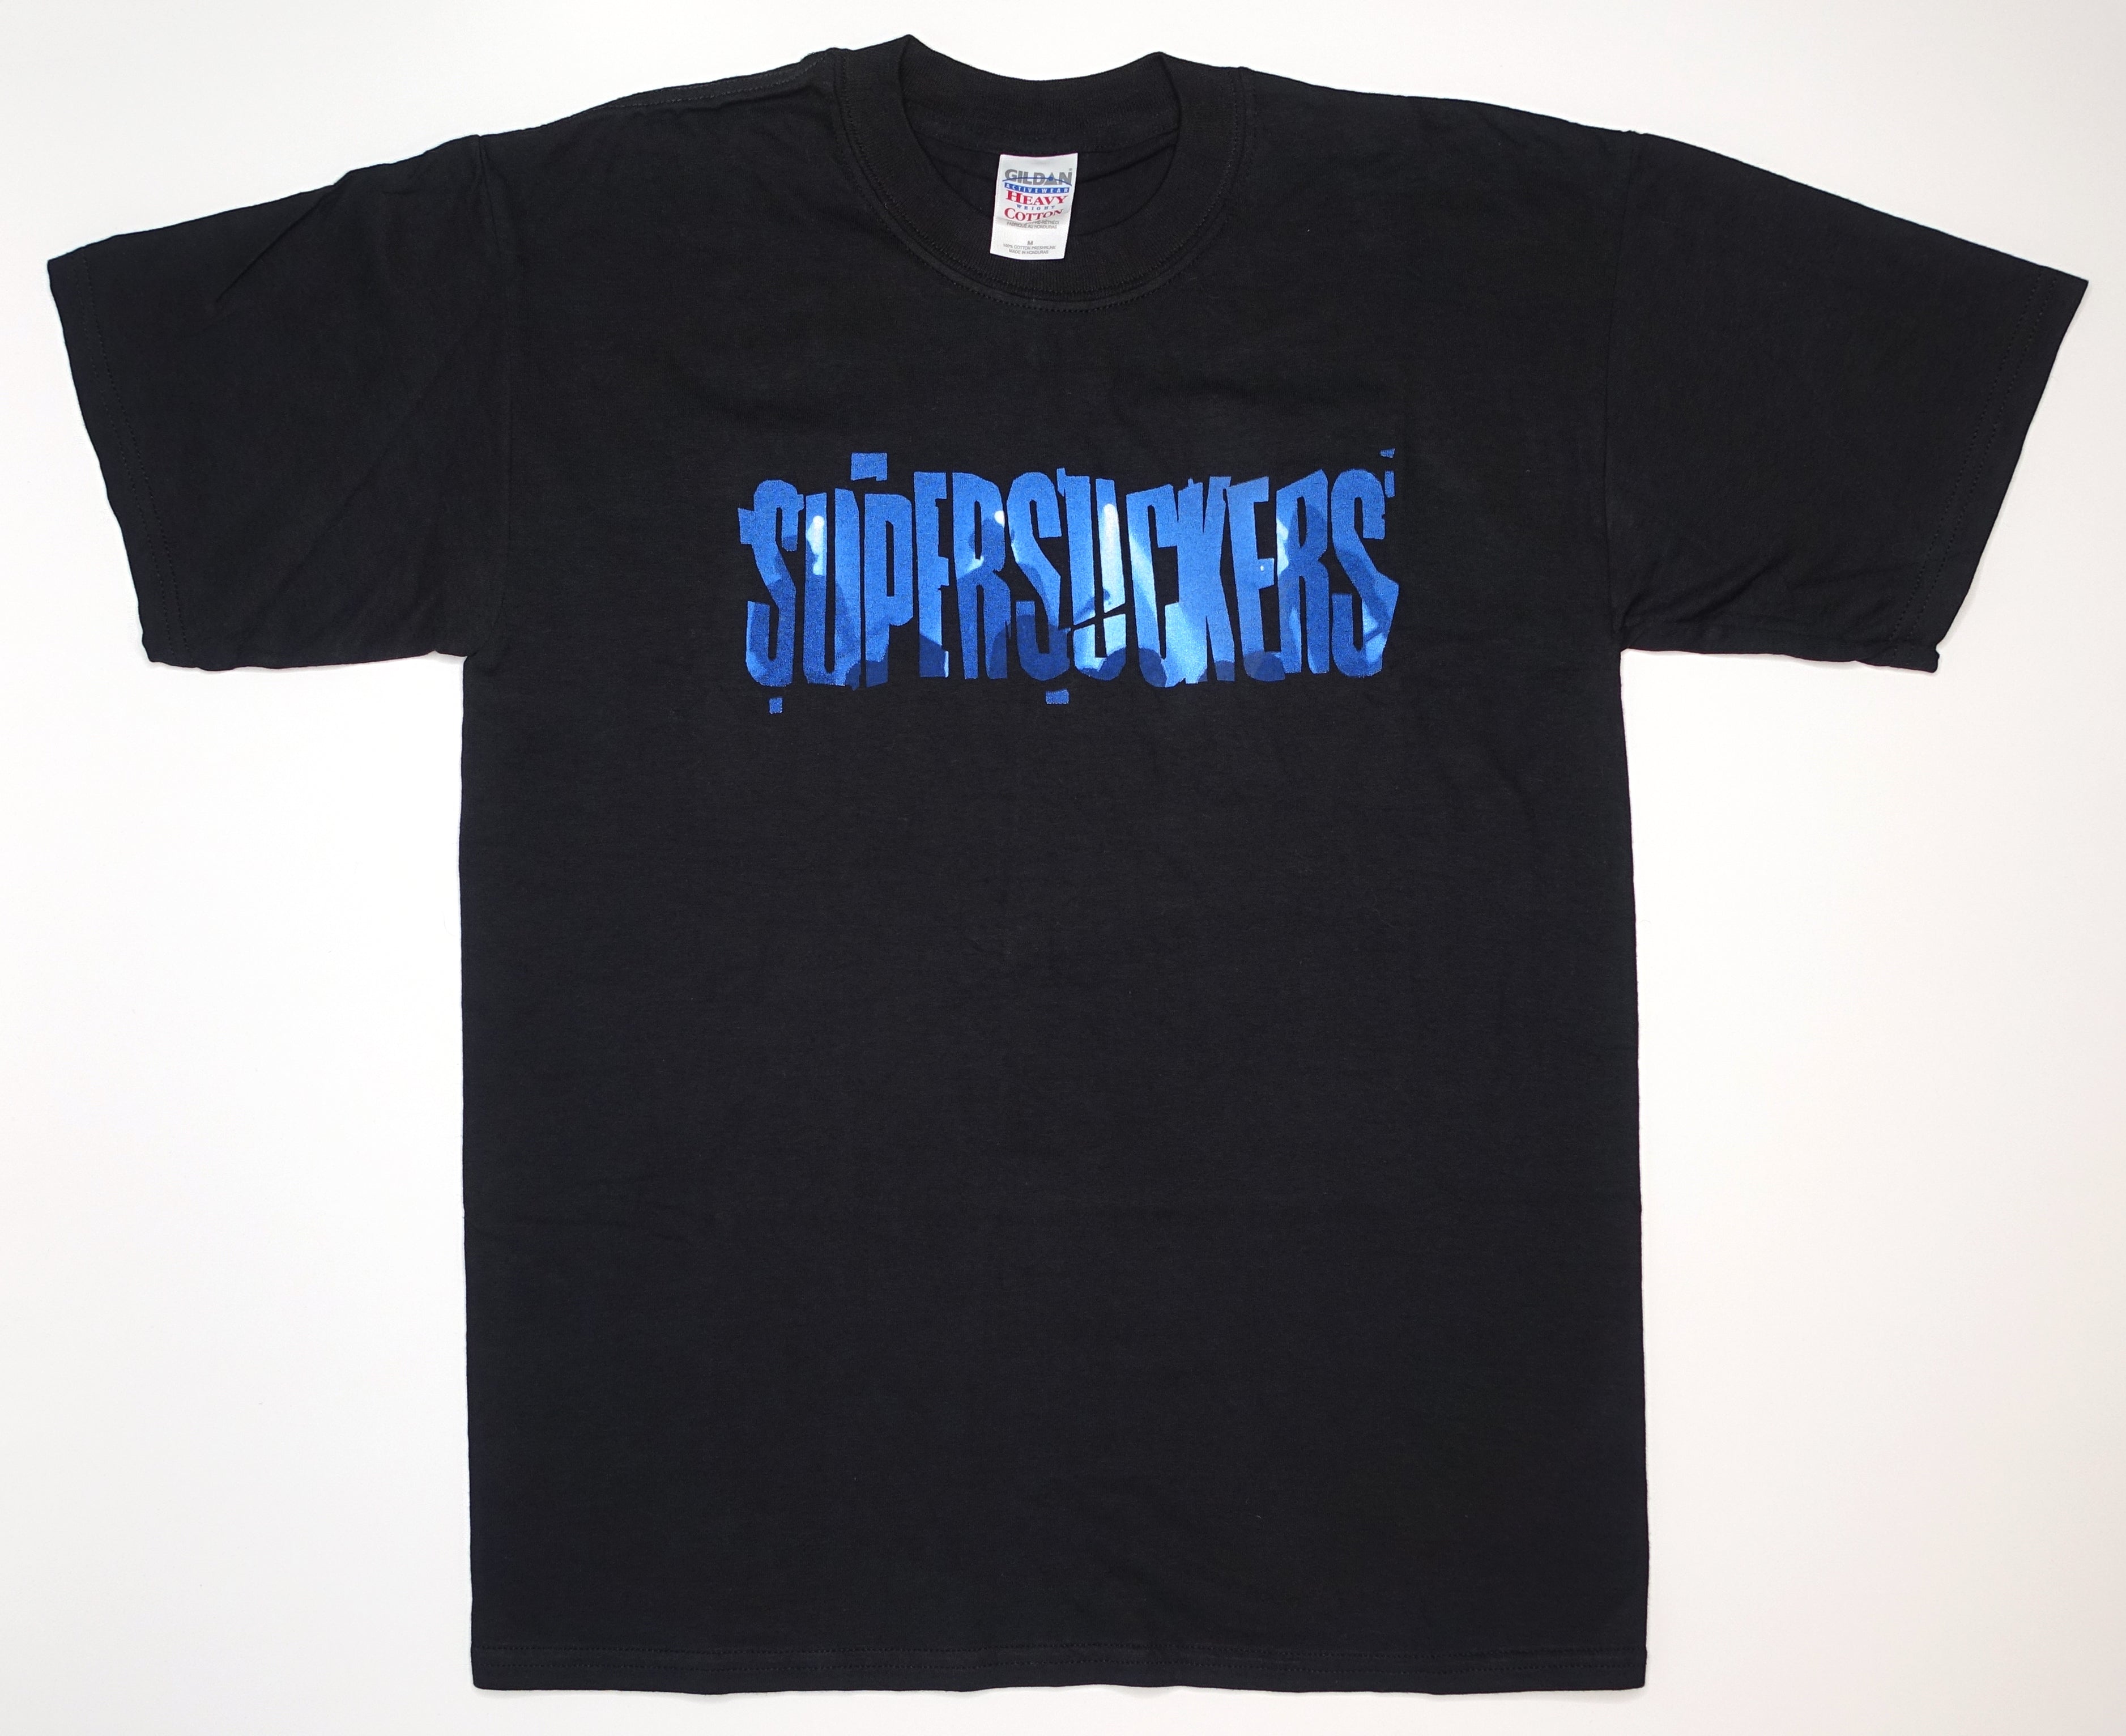 Supersuckers - The Evil Powers Of Rock 'n' Roll 1999 Tour Shirt Size Medium